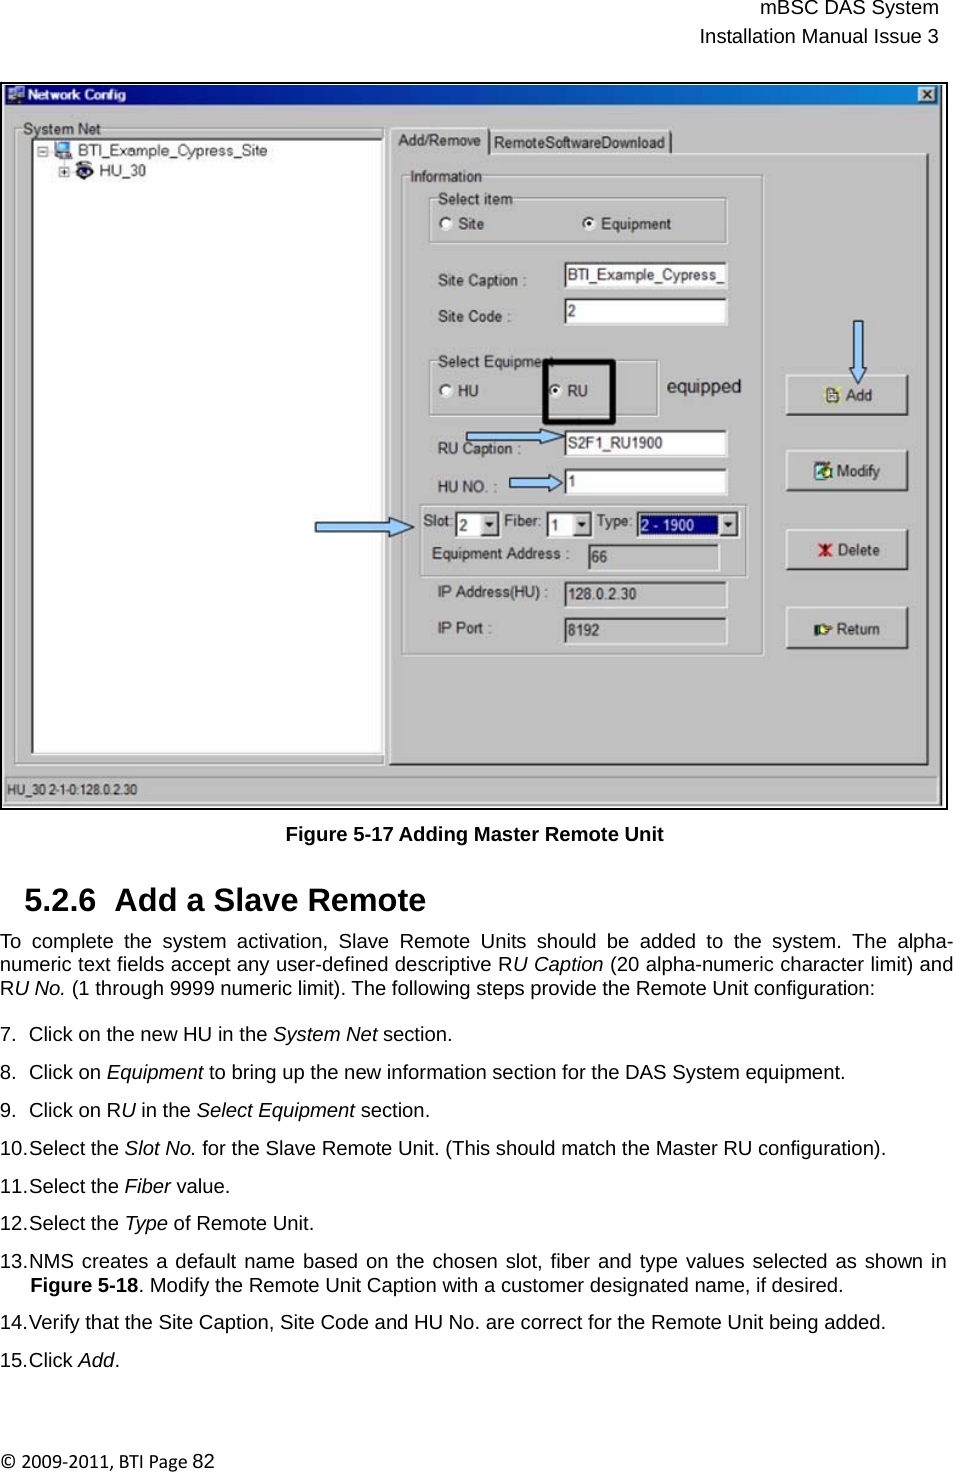 mBSC DAS SystemInstallation Manual Issue 3©2009‐2011,BTIPage82                                       Figure 5-17 Adding Master Remote Unit   5.2.6  Add a Slave Remote  To complete the system activation, Slave Remote Units should be added to the system. The alpha- numeric text fields accept any user-defined descriptive RU Caption (20 alpha-numeric character limit) and RU No. (1 through 9999 numeric limit). The following steps provide the Remote Unit configuration:  7.  Click on the new HU in the System Net section.  8.  Click on Equipment to bring up the new information section for the DAS System equipment.  9.  Click on RU in the Select Equipment section.  10.Select the Slot No. for the Slave Remote Unit. (This should match the Master RU configuration).  11.Select the Fiber value.  12.Select the Type of Remote Unit.  13.NMS creates a default name based on the chosen slot, fiber and type values selected as shown in Figure 5-18. Modify the Remote Unit Caption with a customer designated name, if desired.  14.Verify that the Site Caption, Site Code and HU No. are correct for the Remote Unit being added.  15.Click Add. 